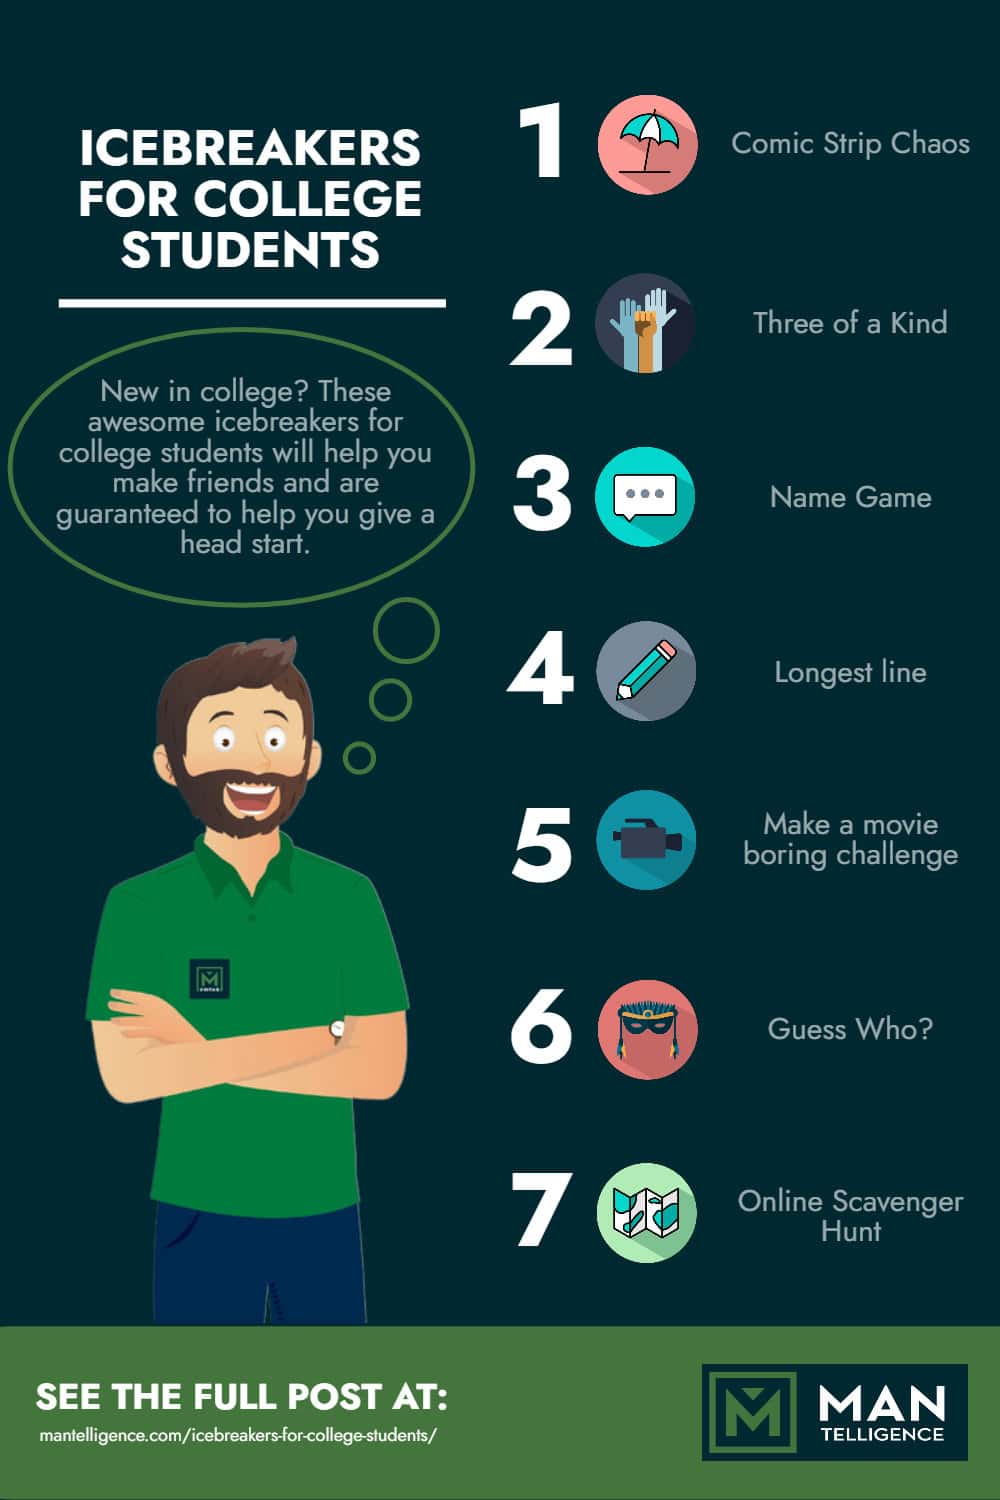 Ice breakers for College Student - INFOGRAPHIC